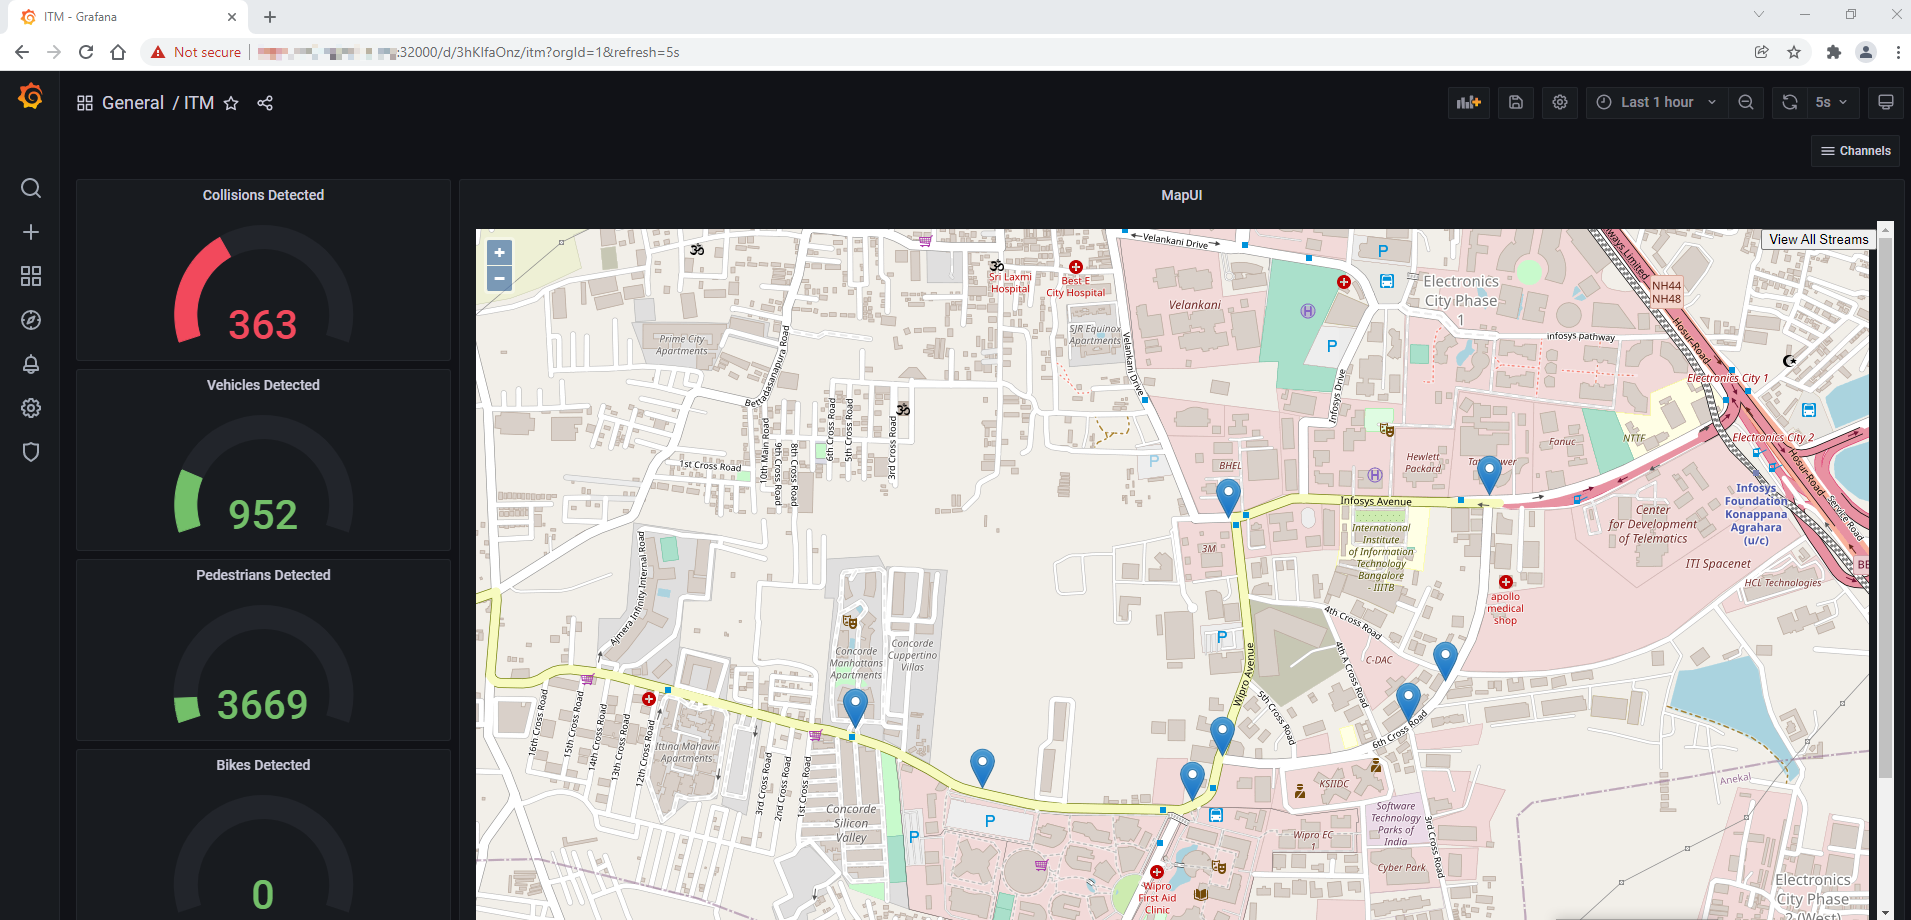 A web app dashboard with navigation, a large map of a city, and an analysis sidebar. There are 8 blue drop pins on the map. The sidebar shows four metrics: number of collisions detected, number of vehicles detected, number of pedestrians detected, and number of bikes detected.